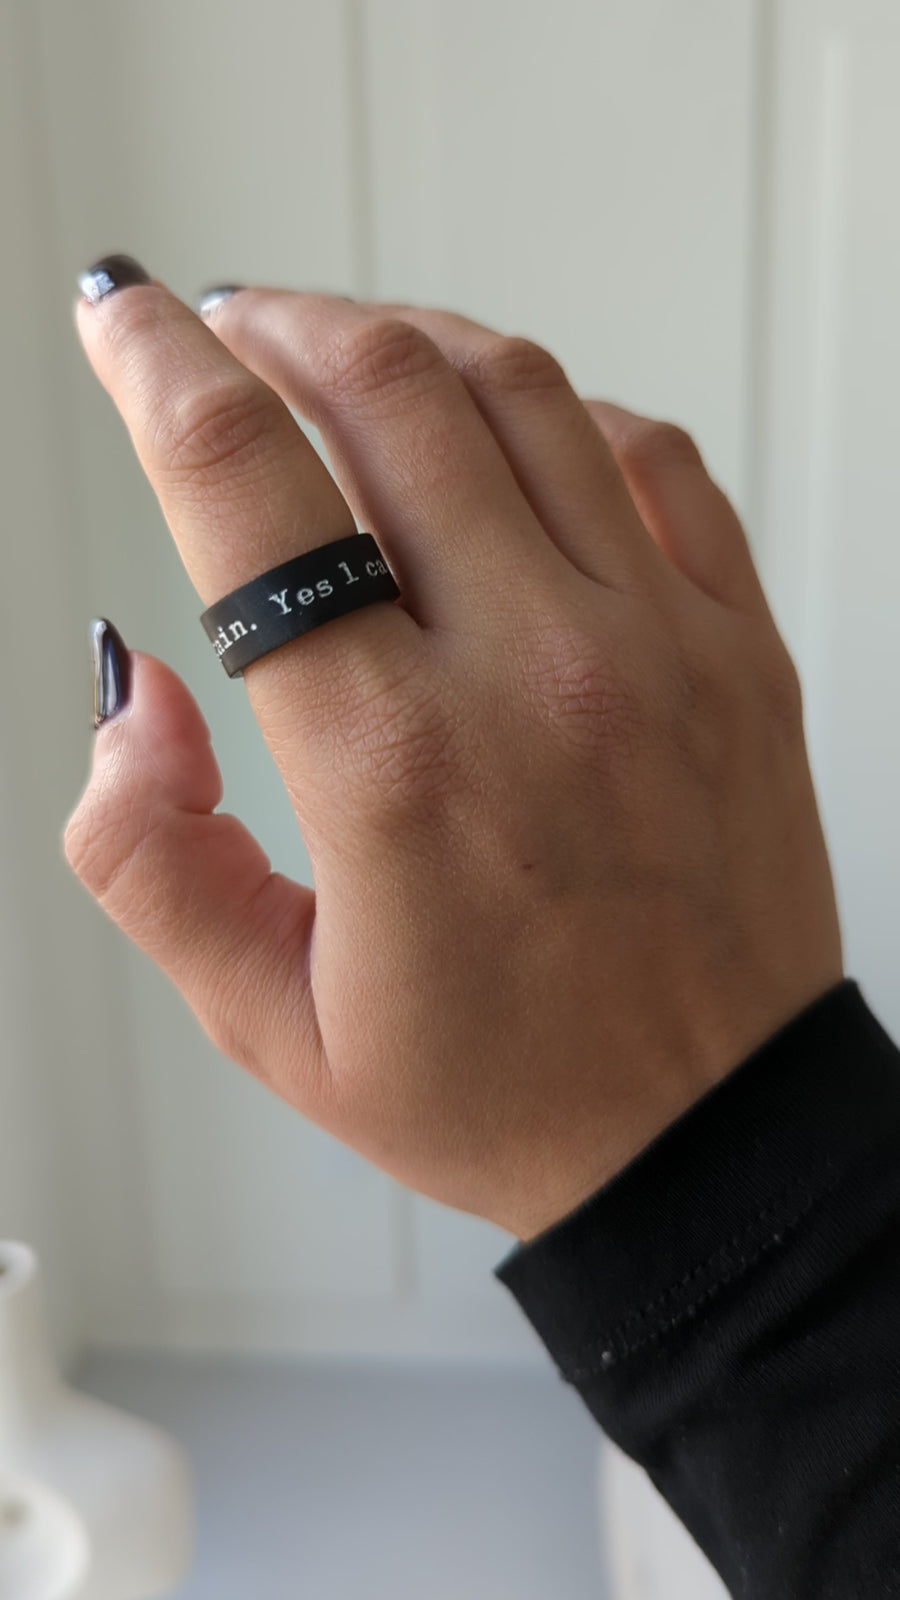 The Resilience Band - matte black finish